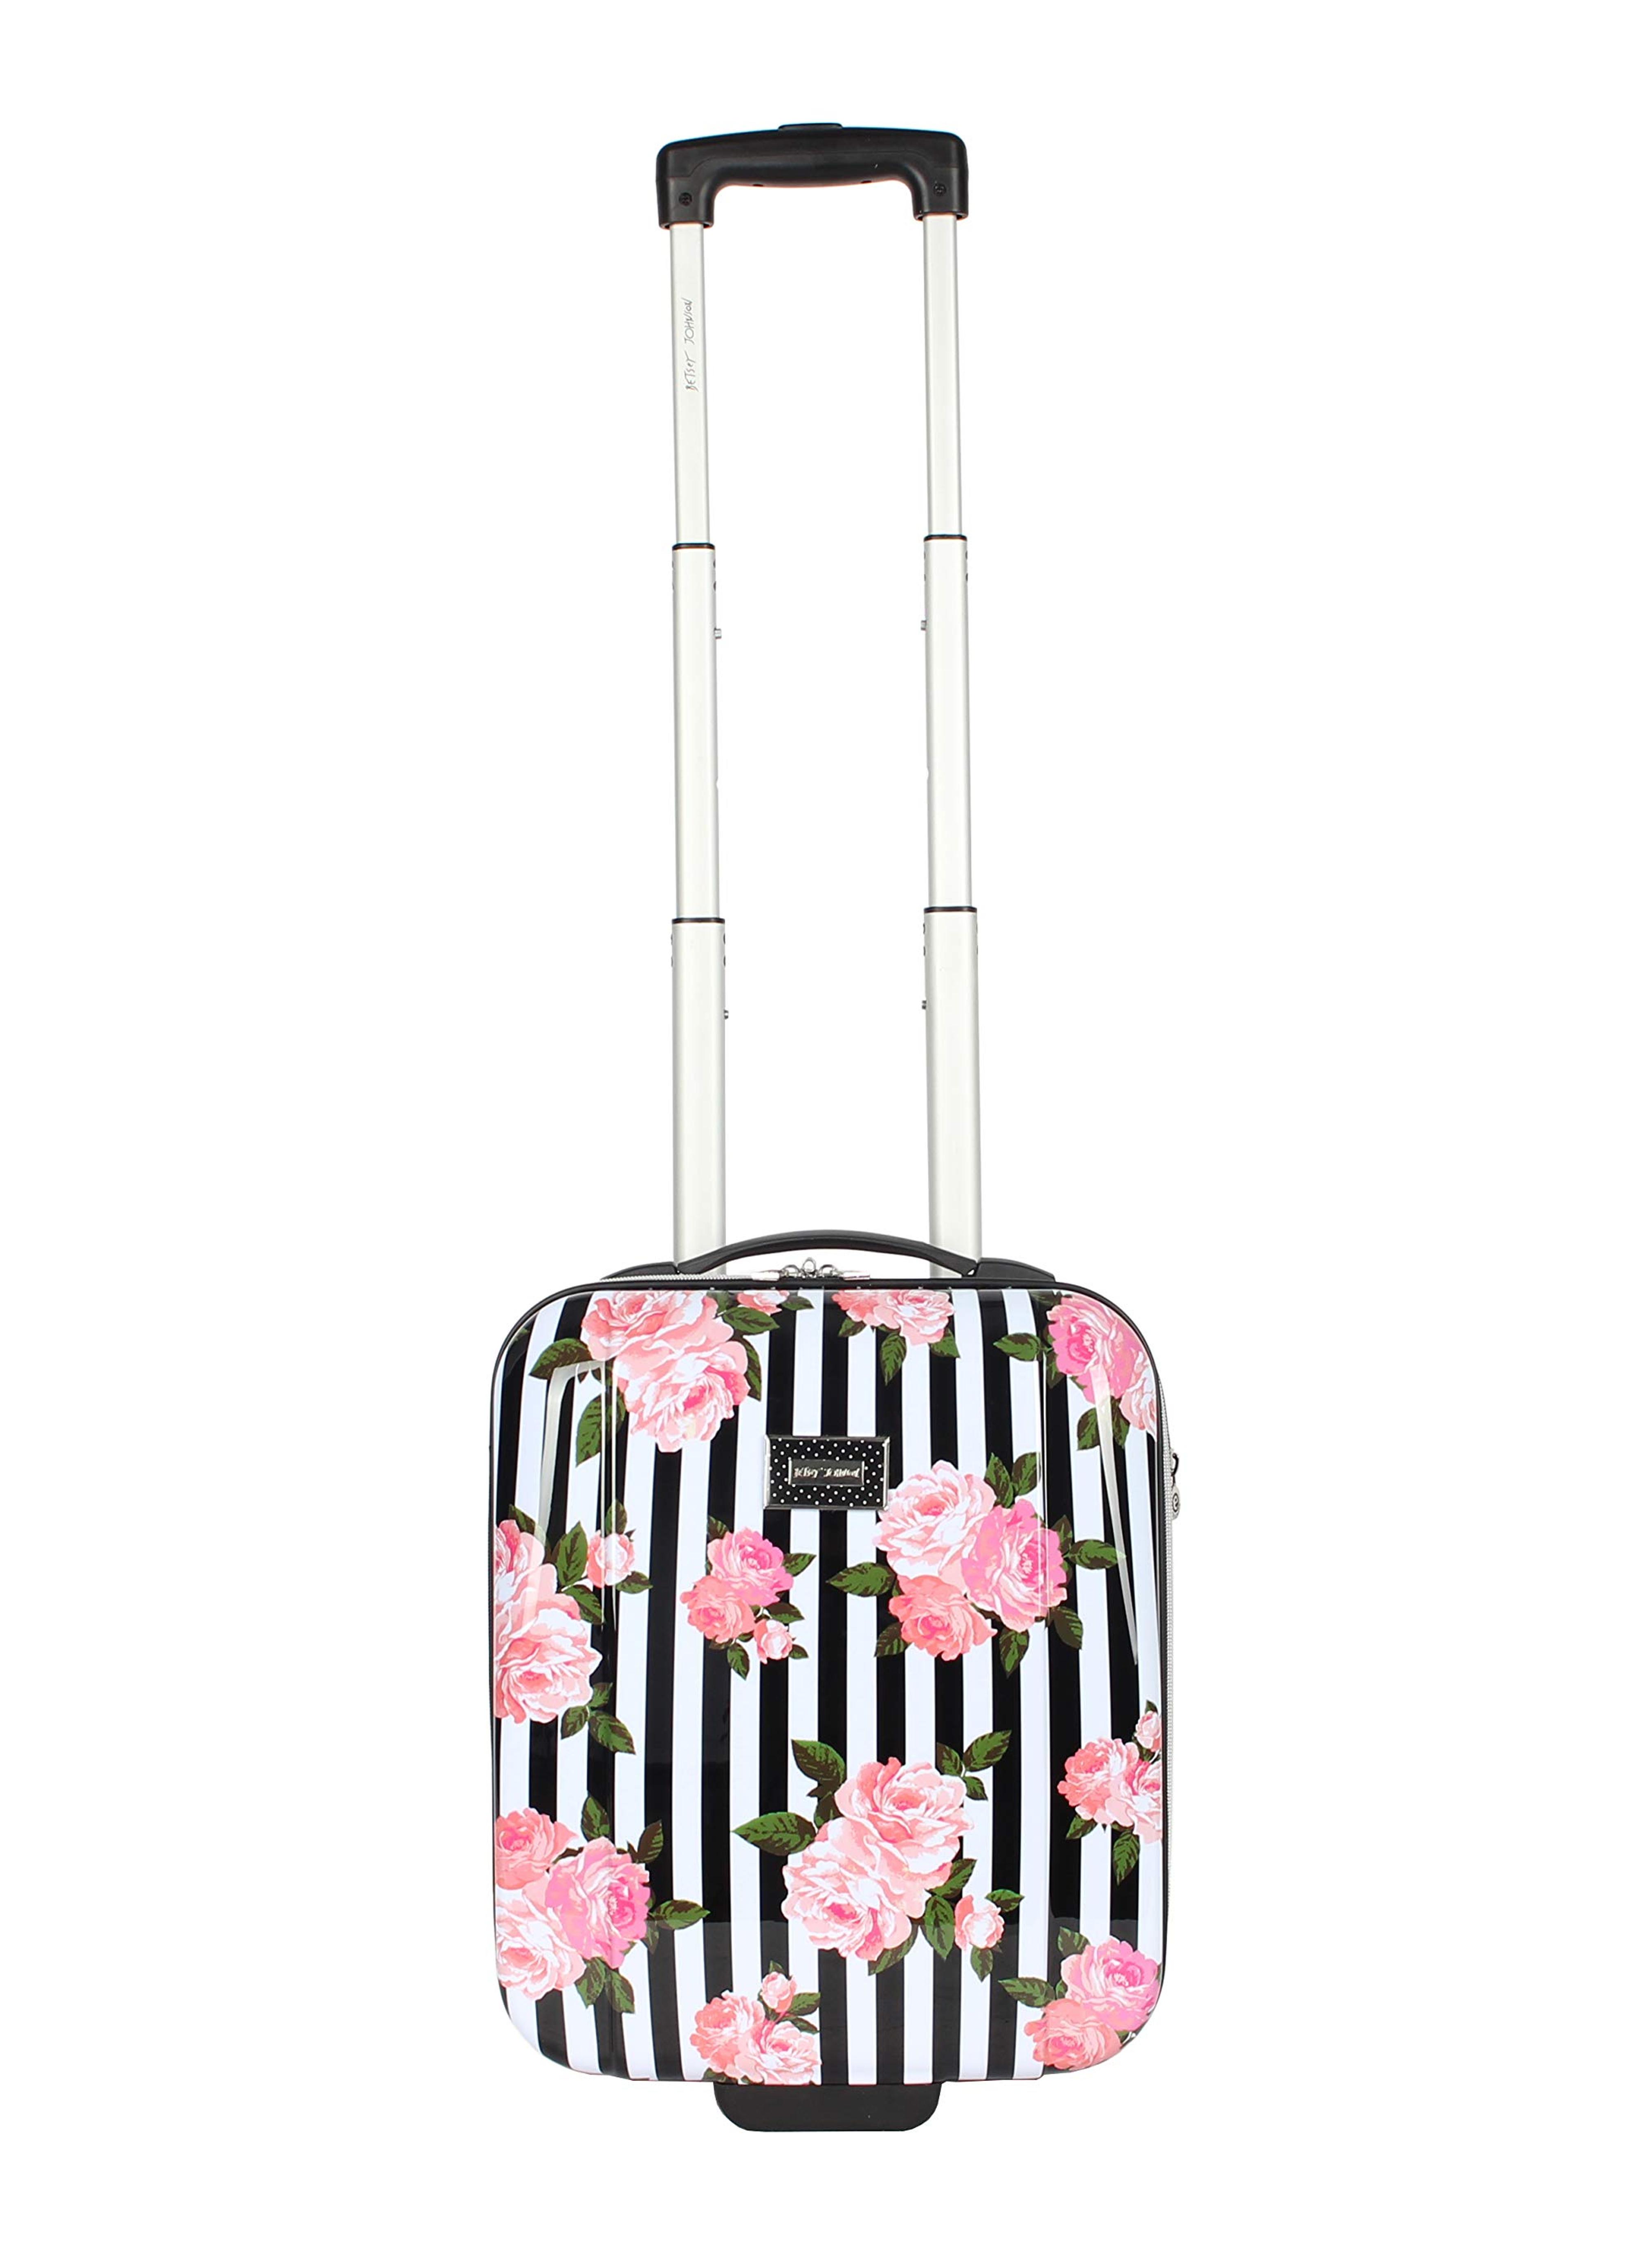 Amazon.com | Betsey Johnson Designer Underseat Luggage Collection - 15 Inch Hardside Carry On Suitcase for Women- Lightweight Under Seat Bag with 2-Rolling Spinner Wheels (Stripe Roses) | Carry-Ons